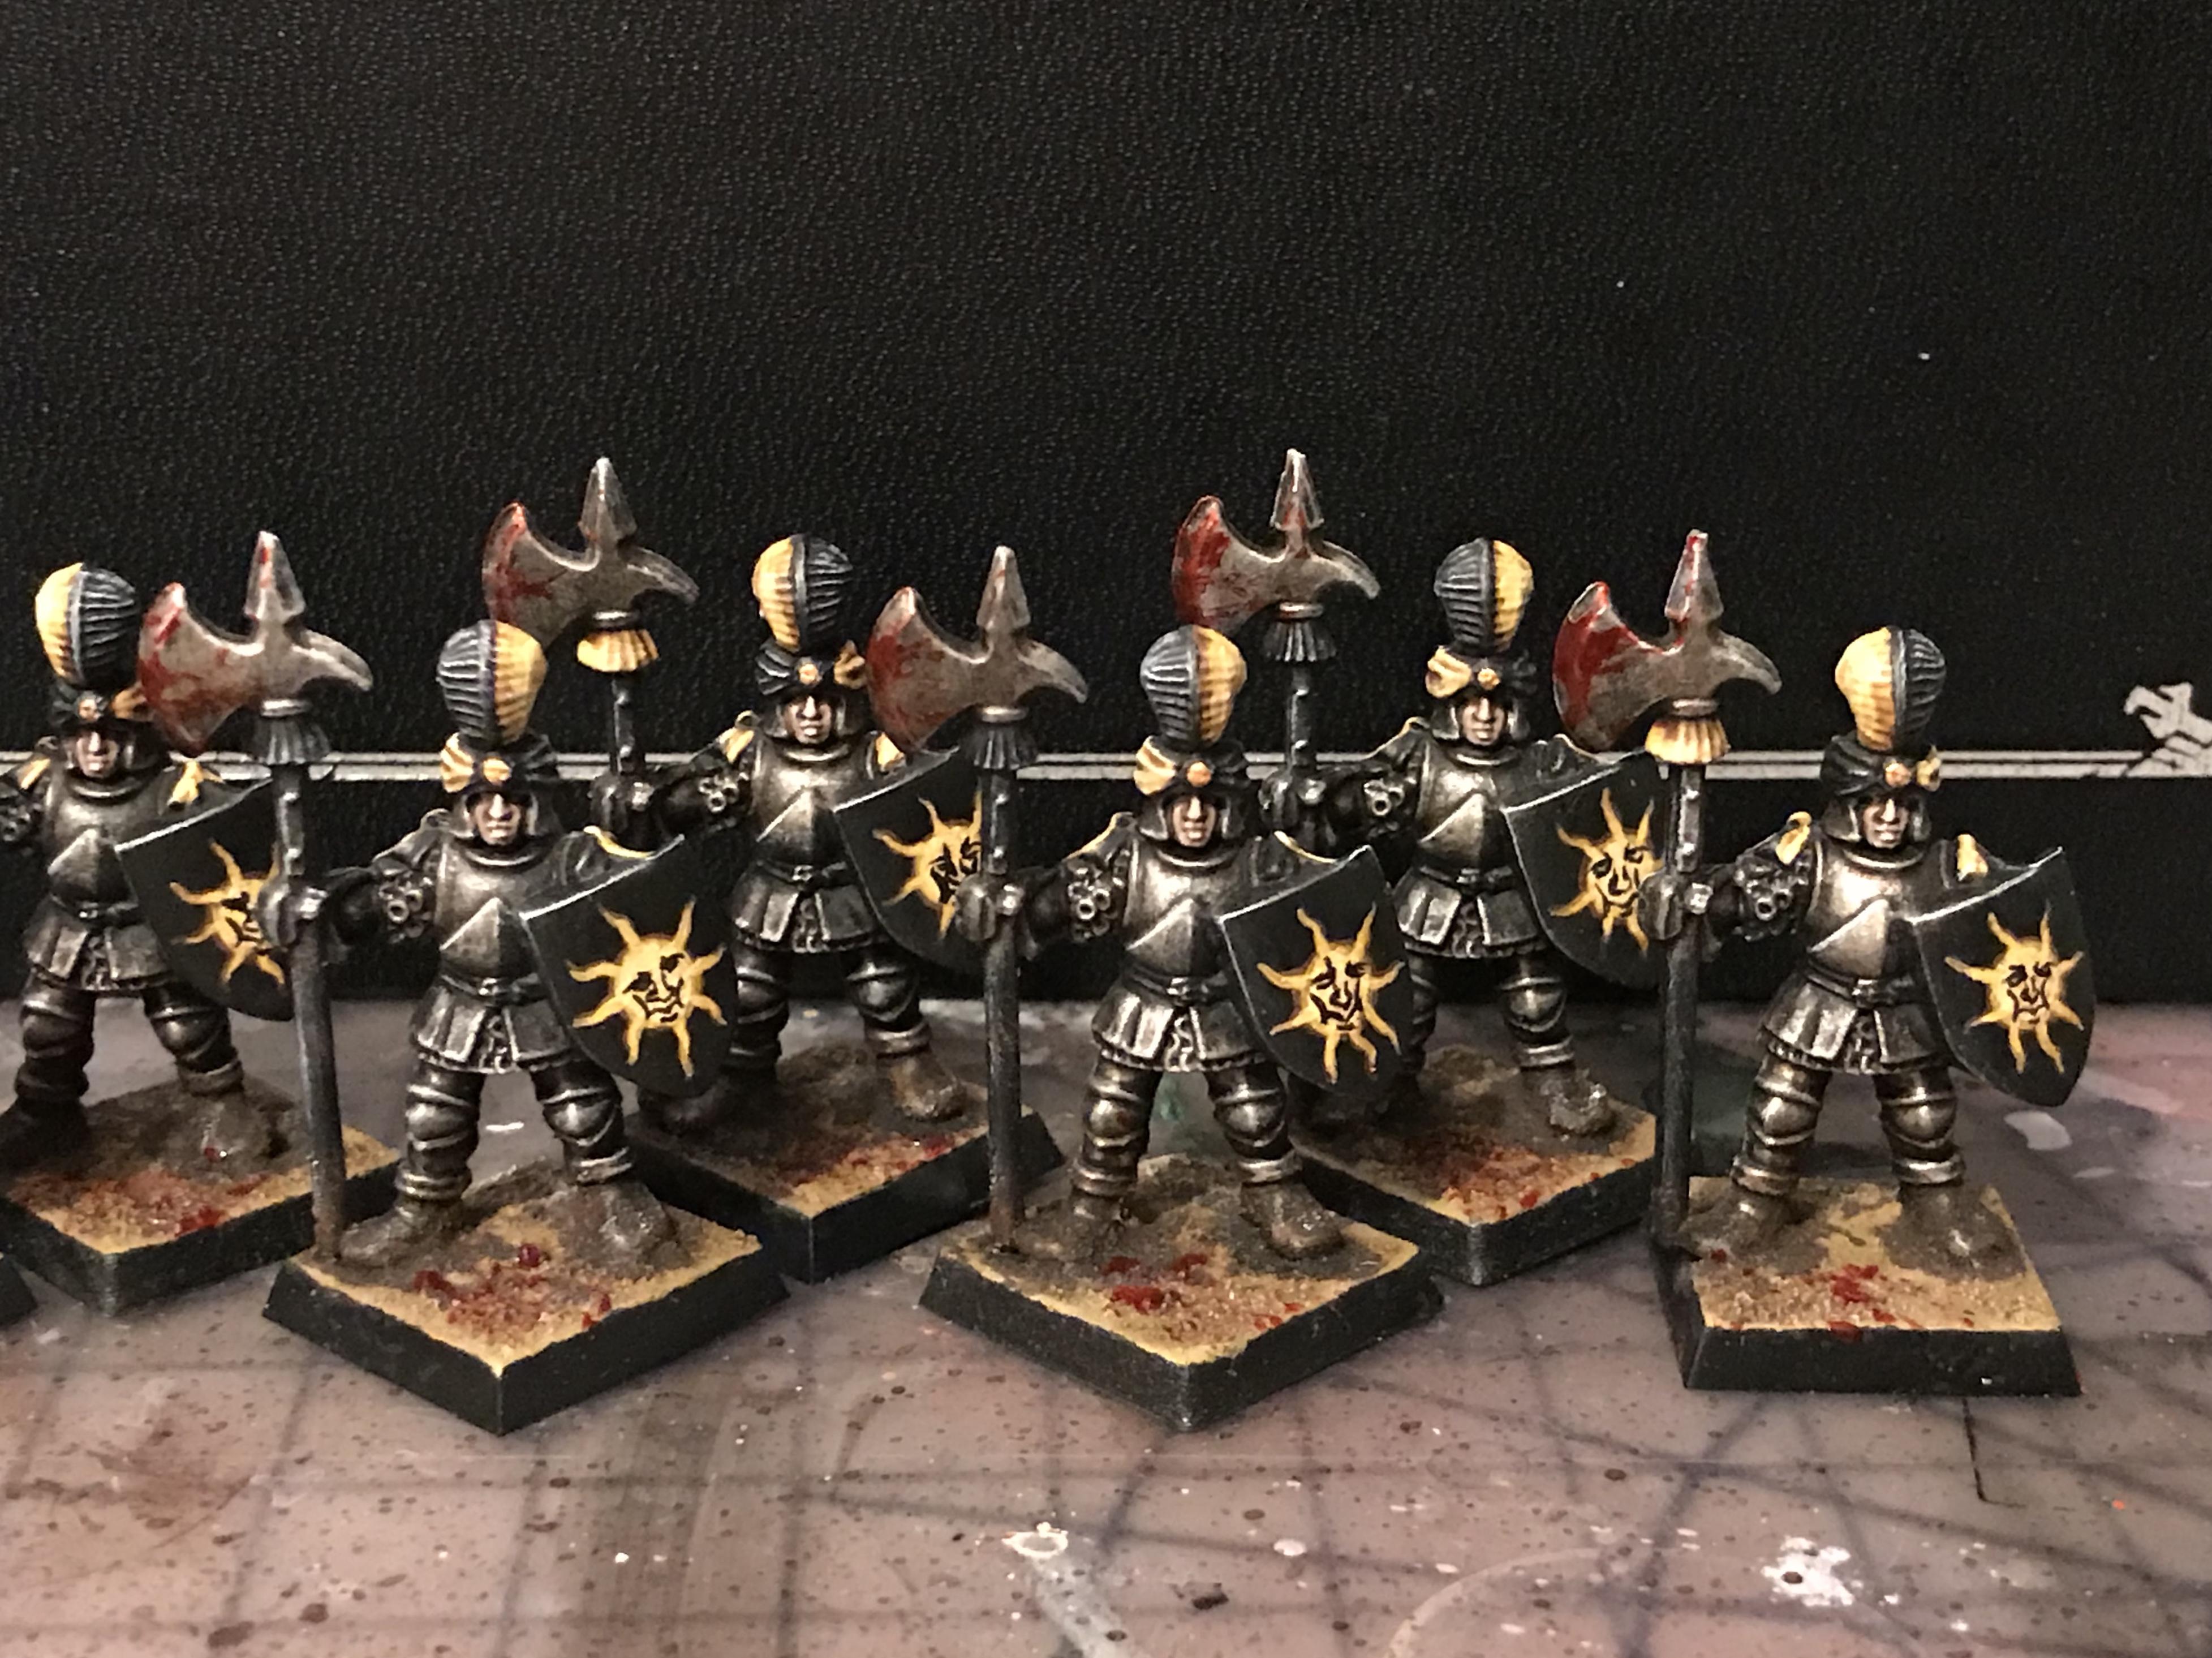 Army, Averland, Battle, Battle Masters, Battles, Core, Count, County, Detachment, Empire, Game, Grand, Halbardier, Halbardiers, Leitdorf, Mad, Marius, Masters, Of, Oldhammer, Regiment, State, Troops, Warhammer Fantasy